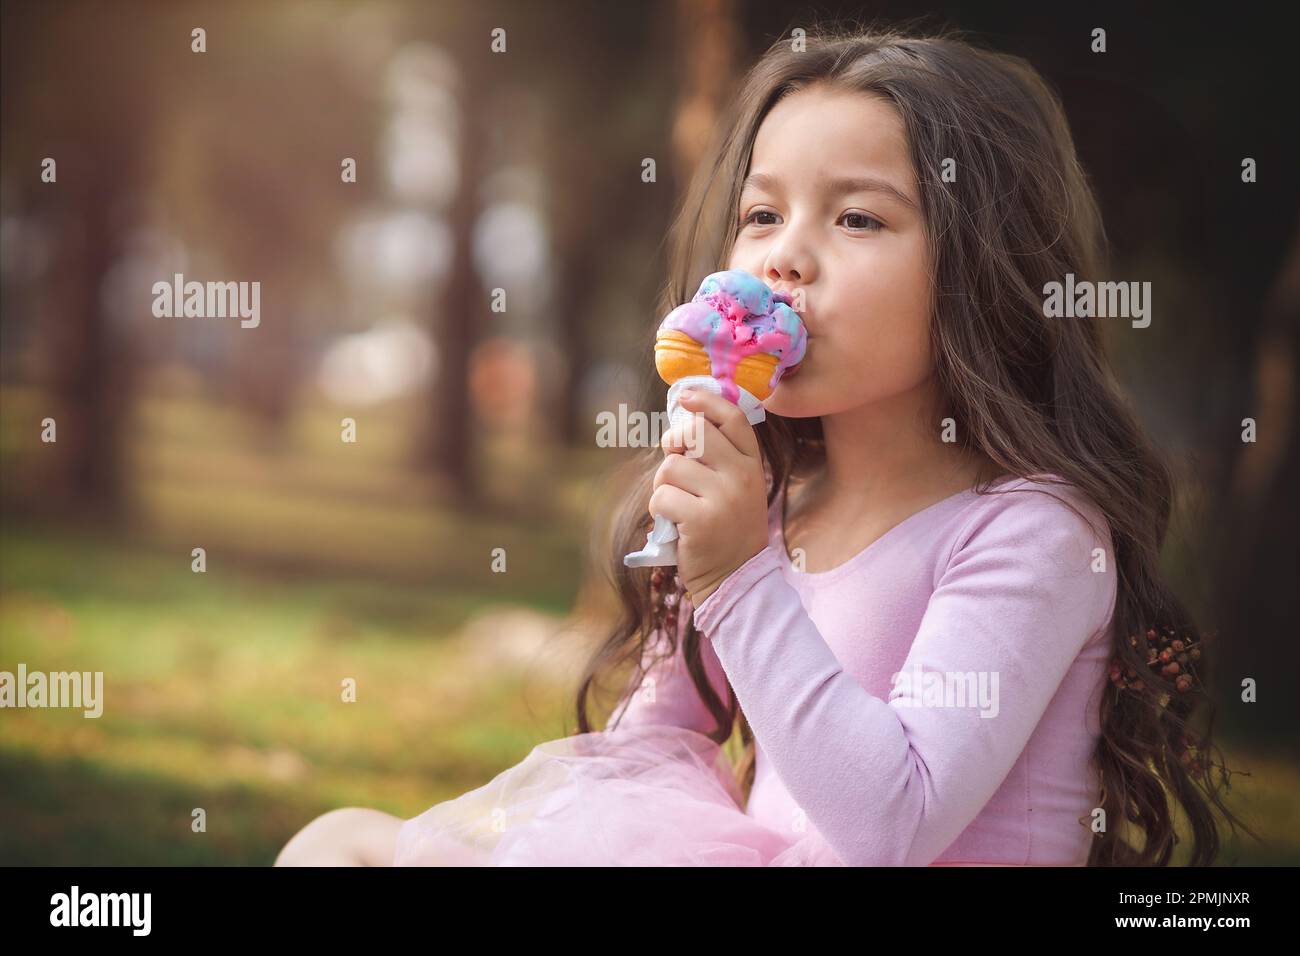 Cute blonde curly haired girl eating a nice ice cream in the forest on a nice summer day, children's day concept, happy girl enjoying a hot day. Stock Photo